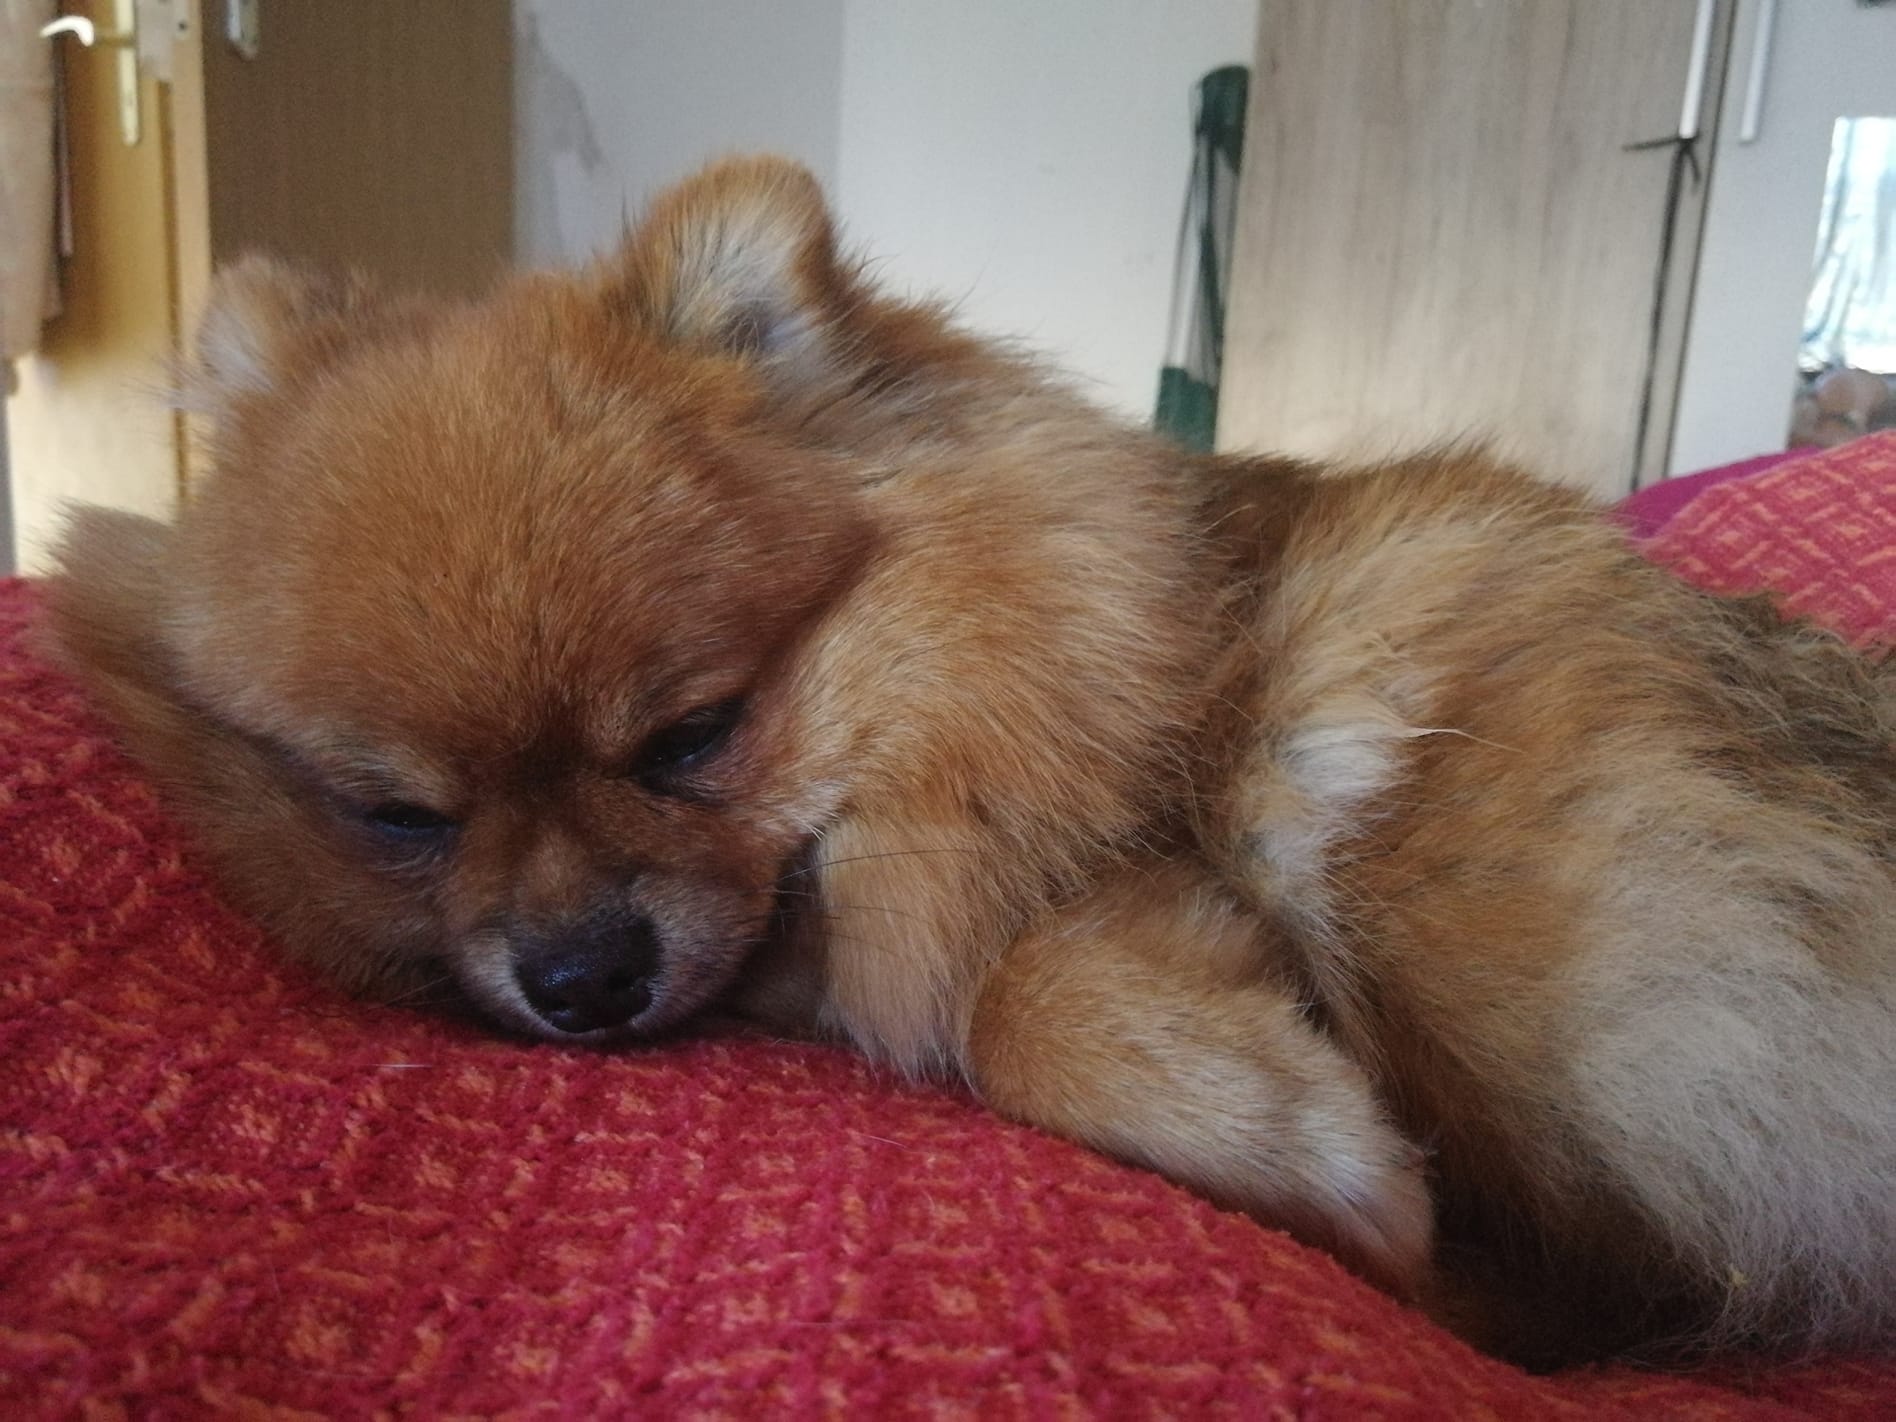 Pomeranian lying on its side sleeping on the bed